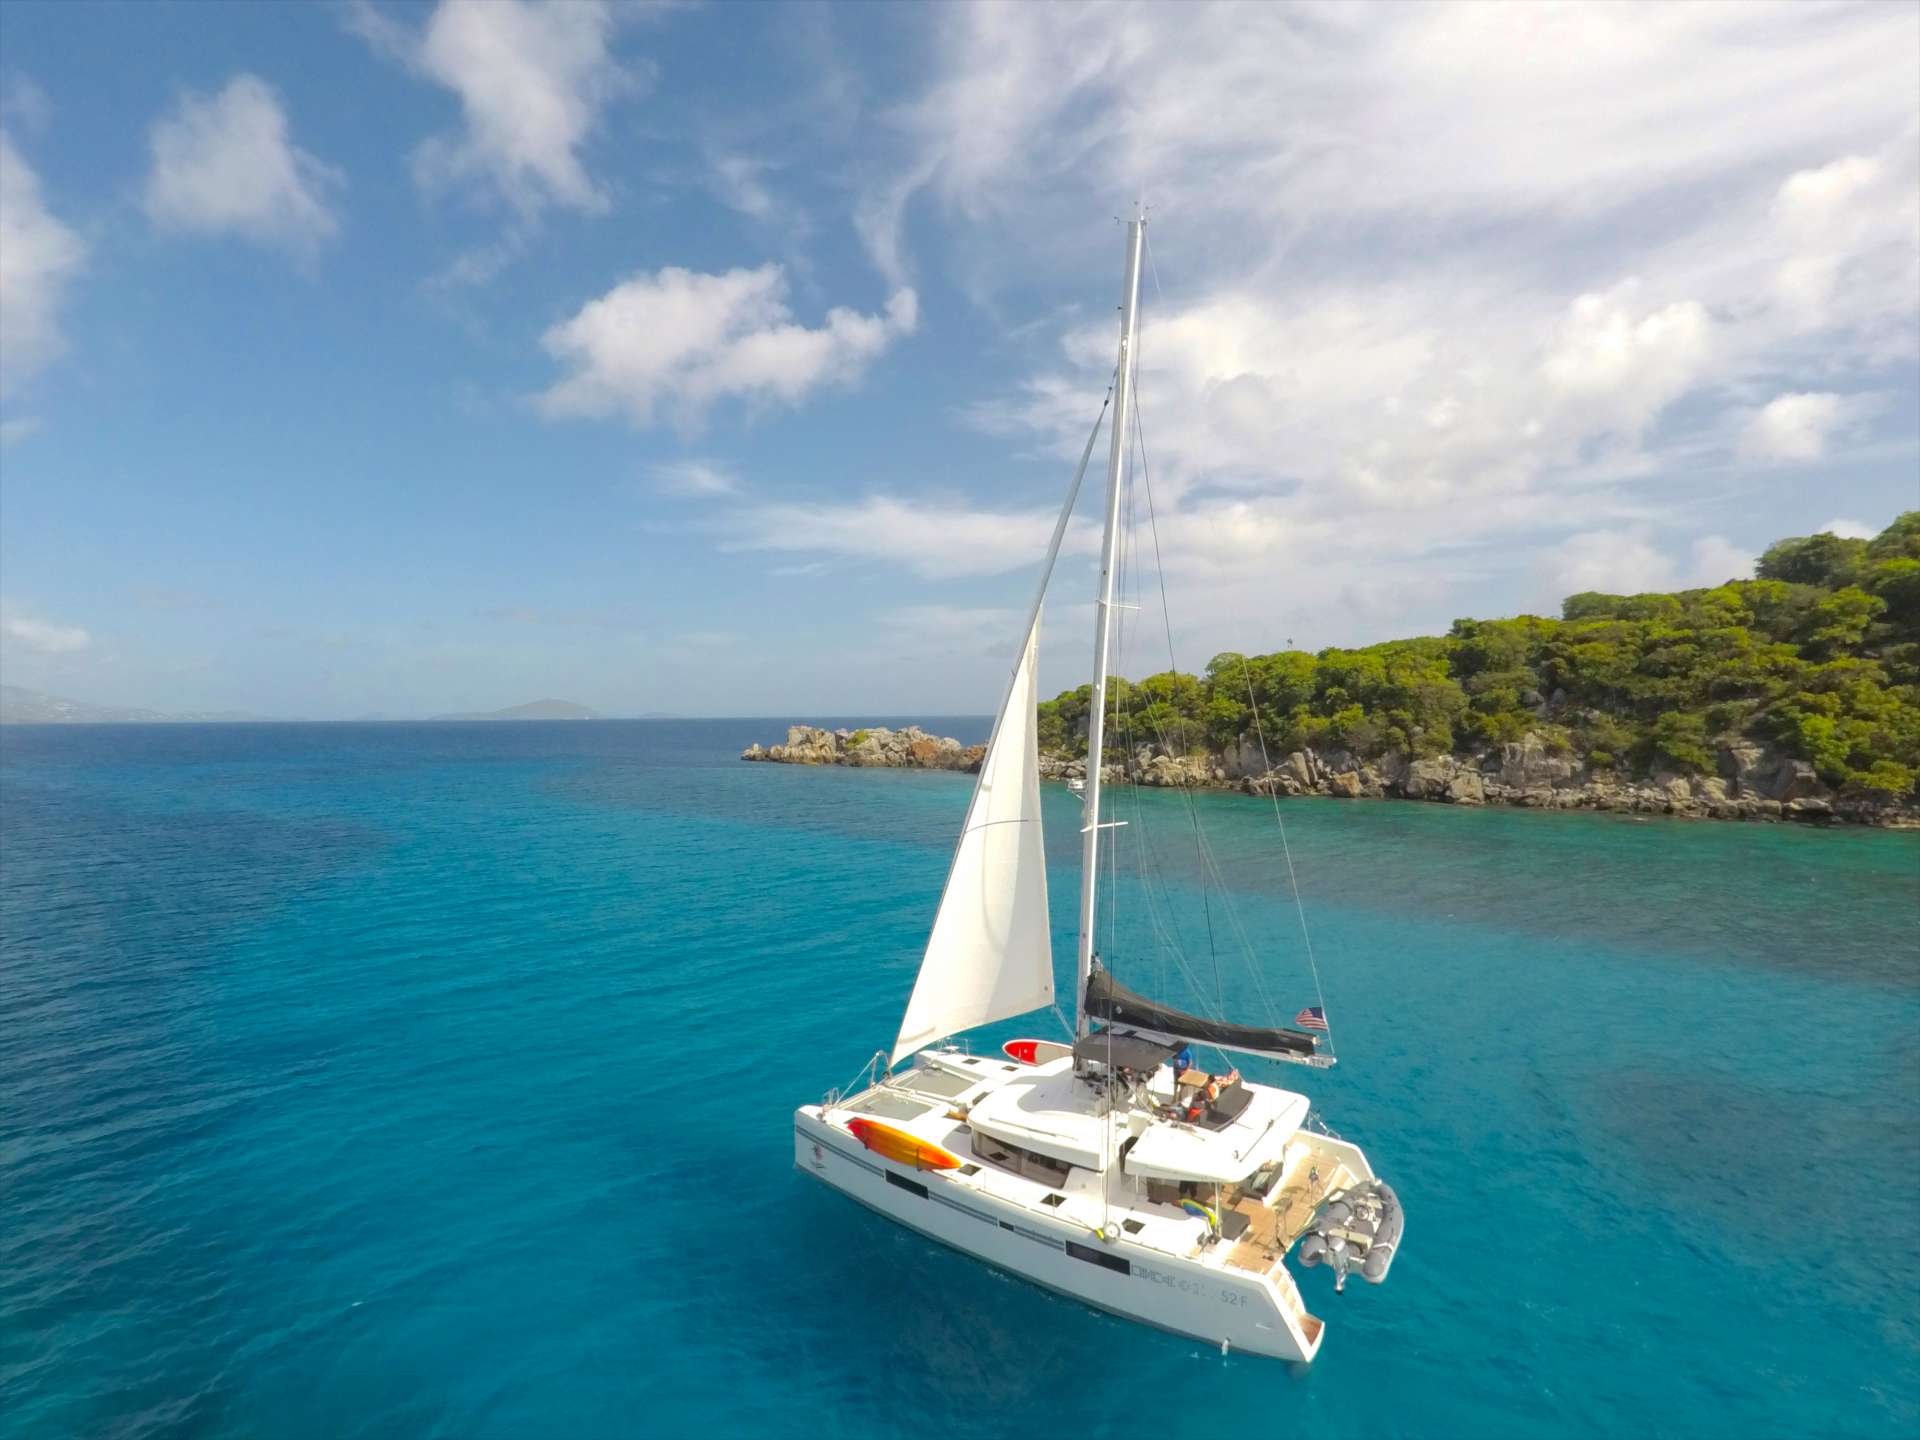 Southern Comfort (formerly Stop Work Order): 52ft Lagoon catamaran yacht charters in The Caribbean